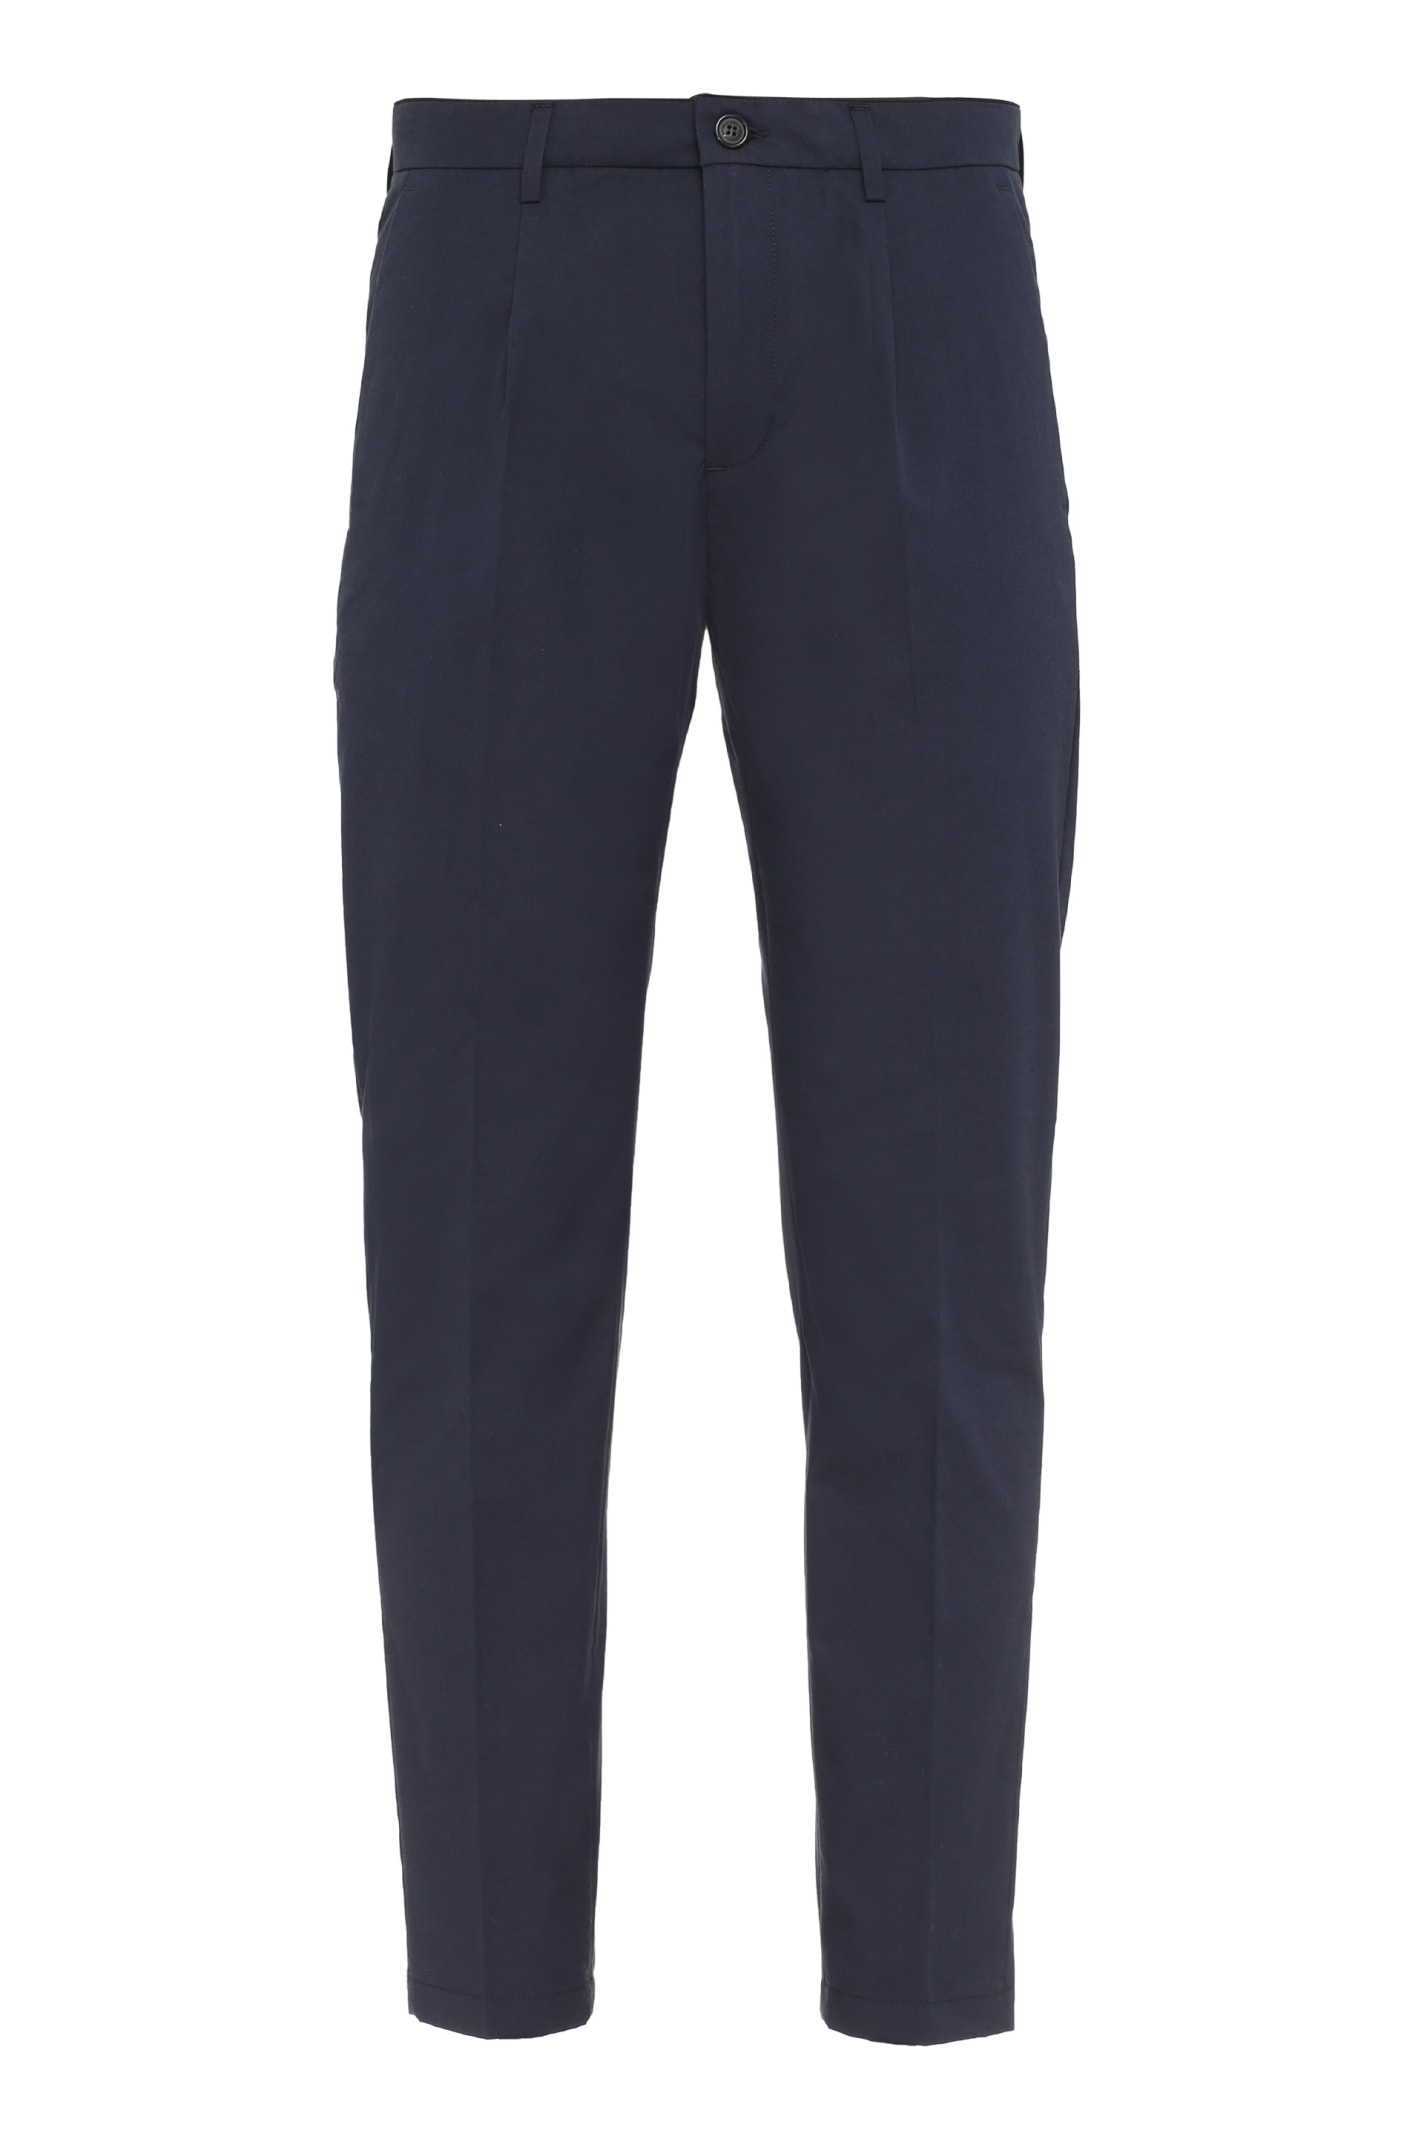 Department 5 Prince Cotton Trousers